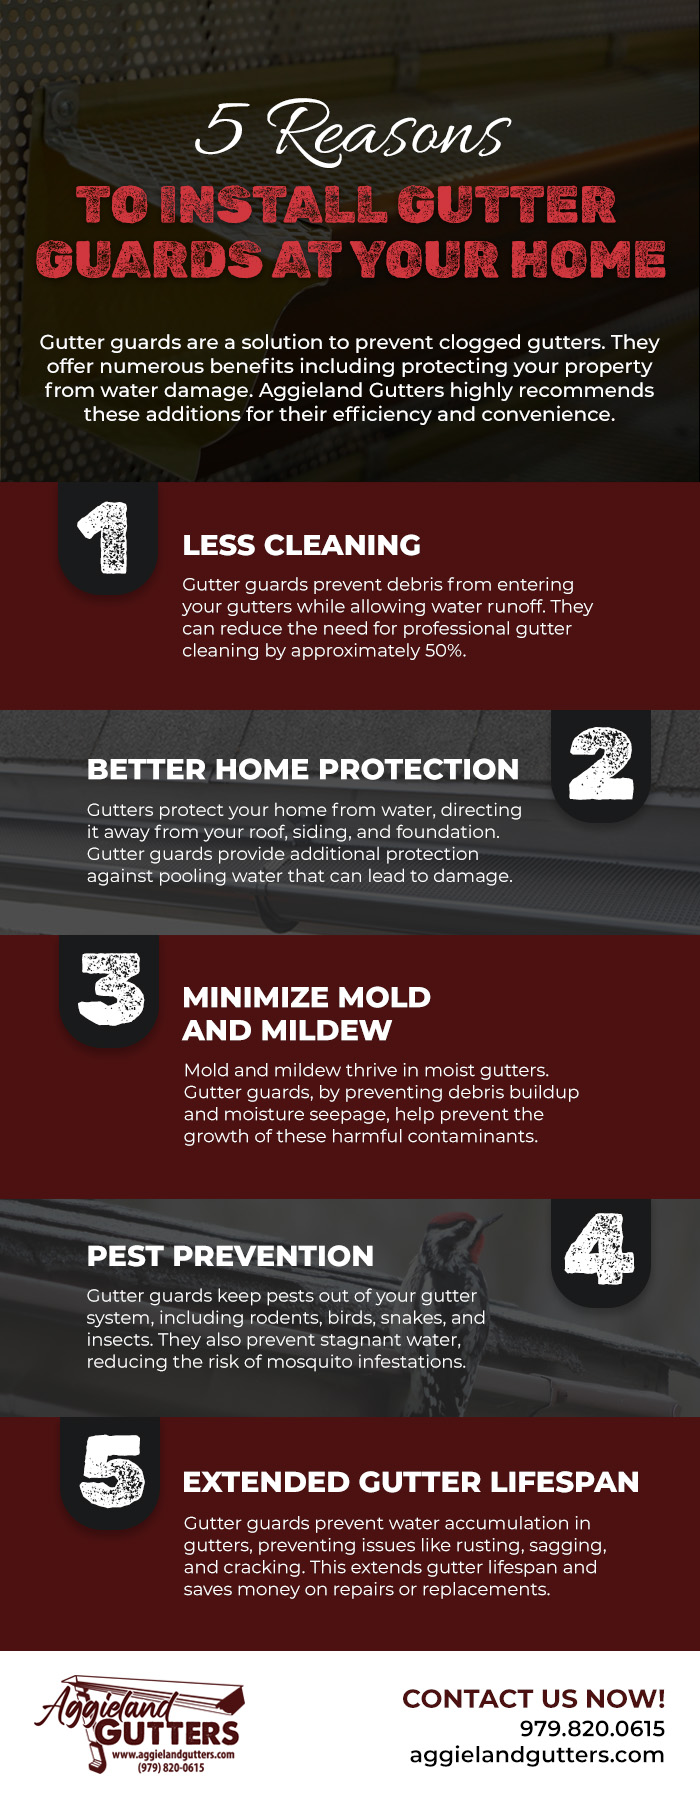 There are many reasons to put gutter guards on your home.